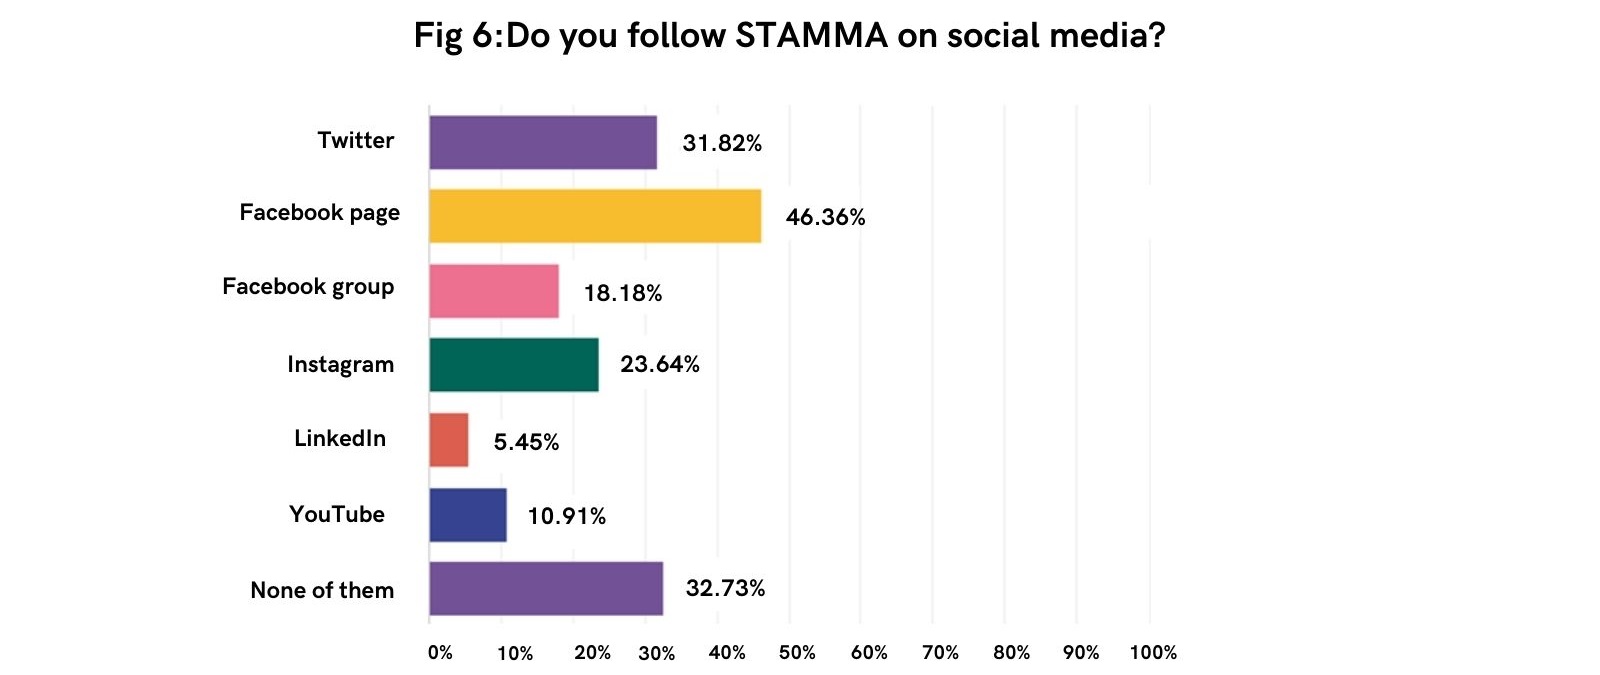 A bar graph showing how survey respondents followed STAMMA on social media